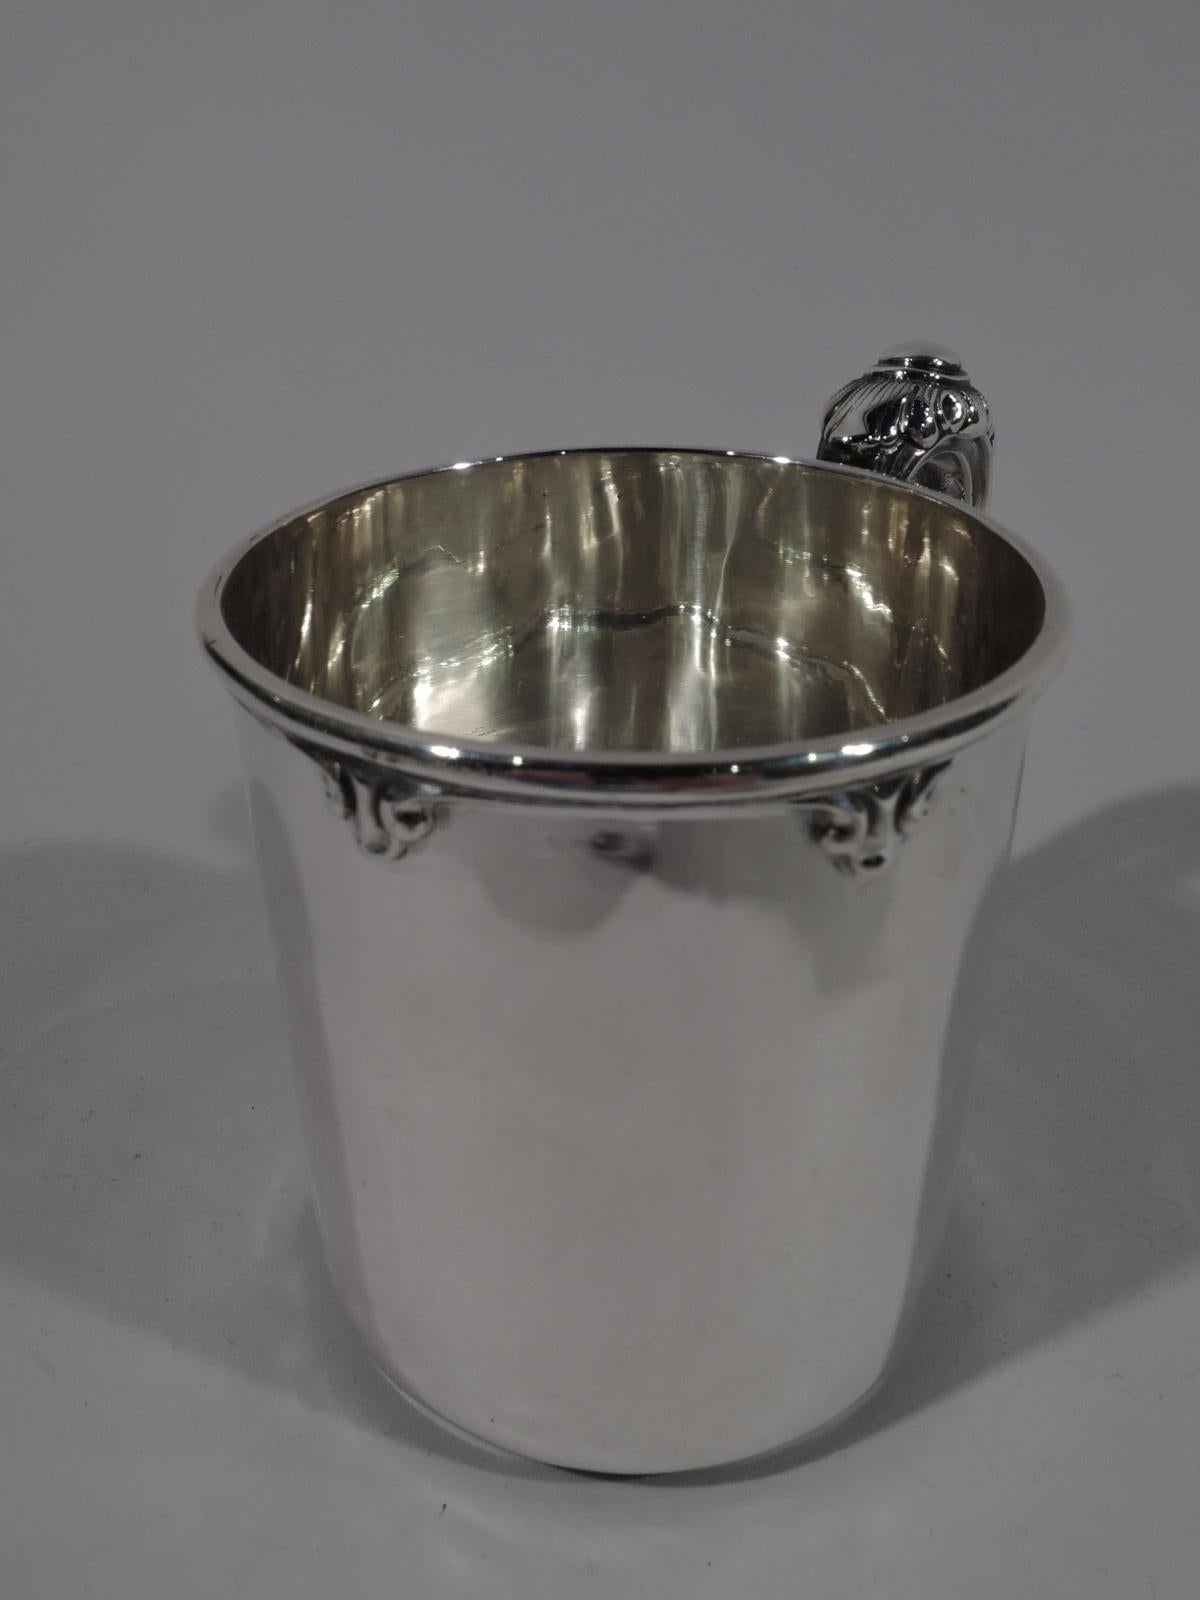 Edwardian Turn-of-the-Century American Sterling Silver Baby Cup